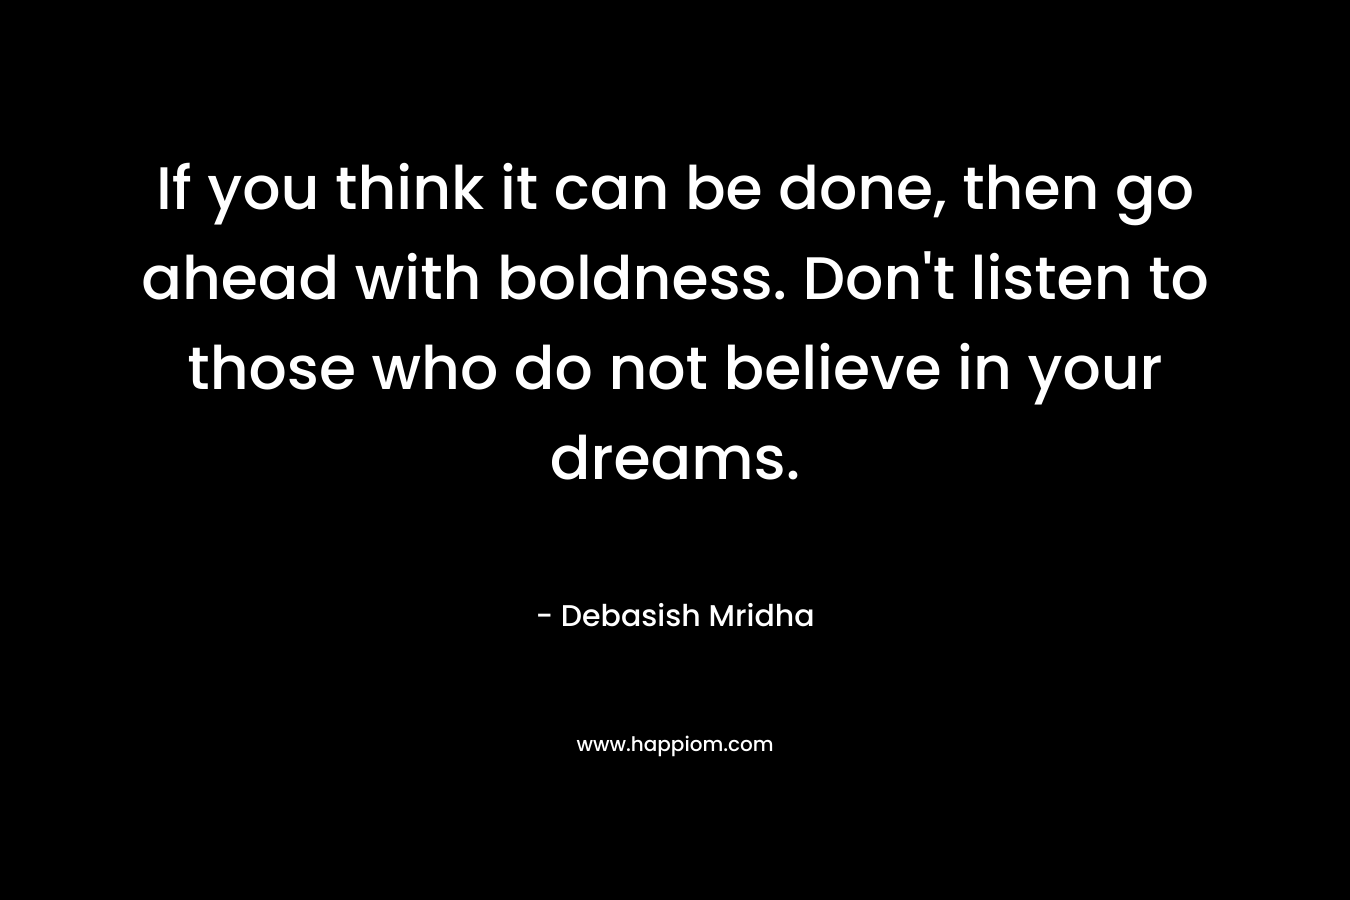 If you think it can be done, then go ahead with boldness. Don’t listen to those who do not believe in your dreams. – Debasish Mridha